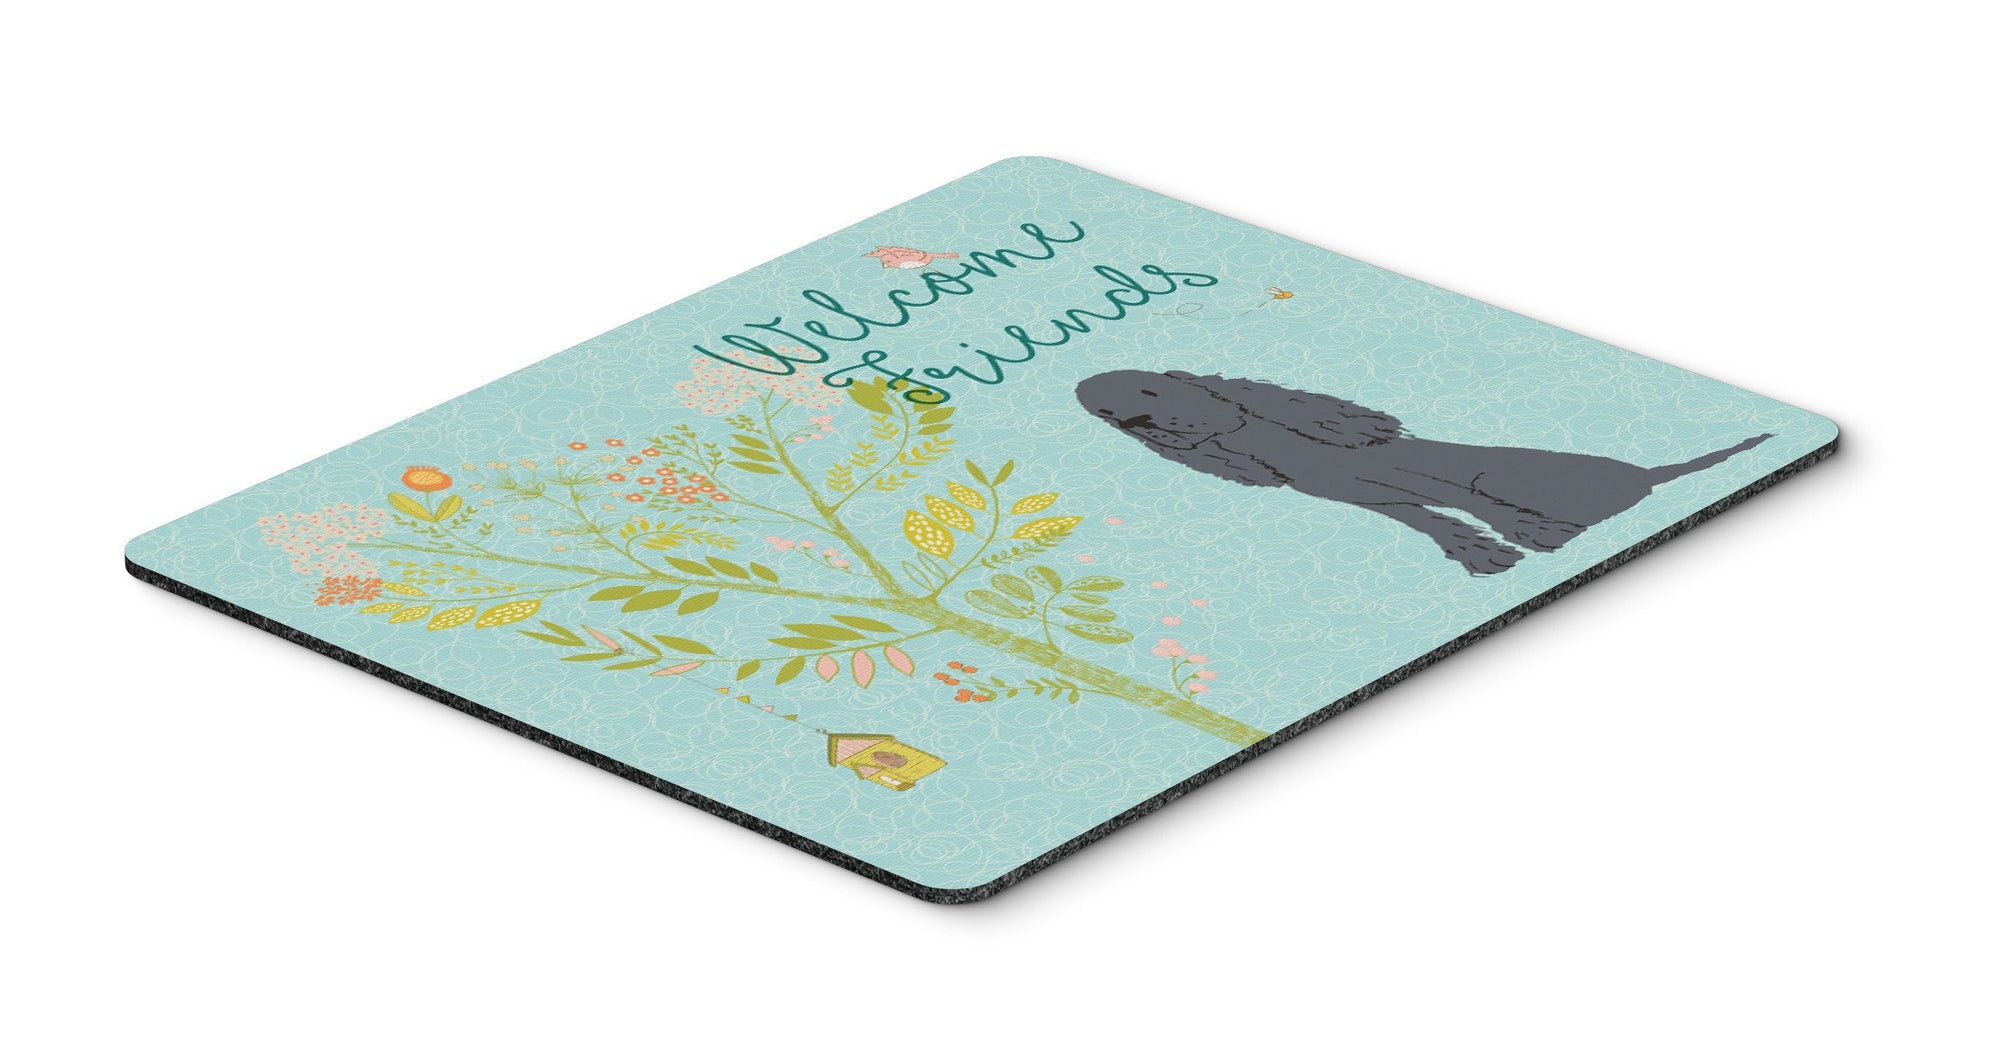 Welcome Friends Black Cocker Spaniel Mouse Pad, Hot Pad or Trivet BB7618MP by Caroline's Treasures